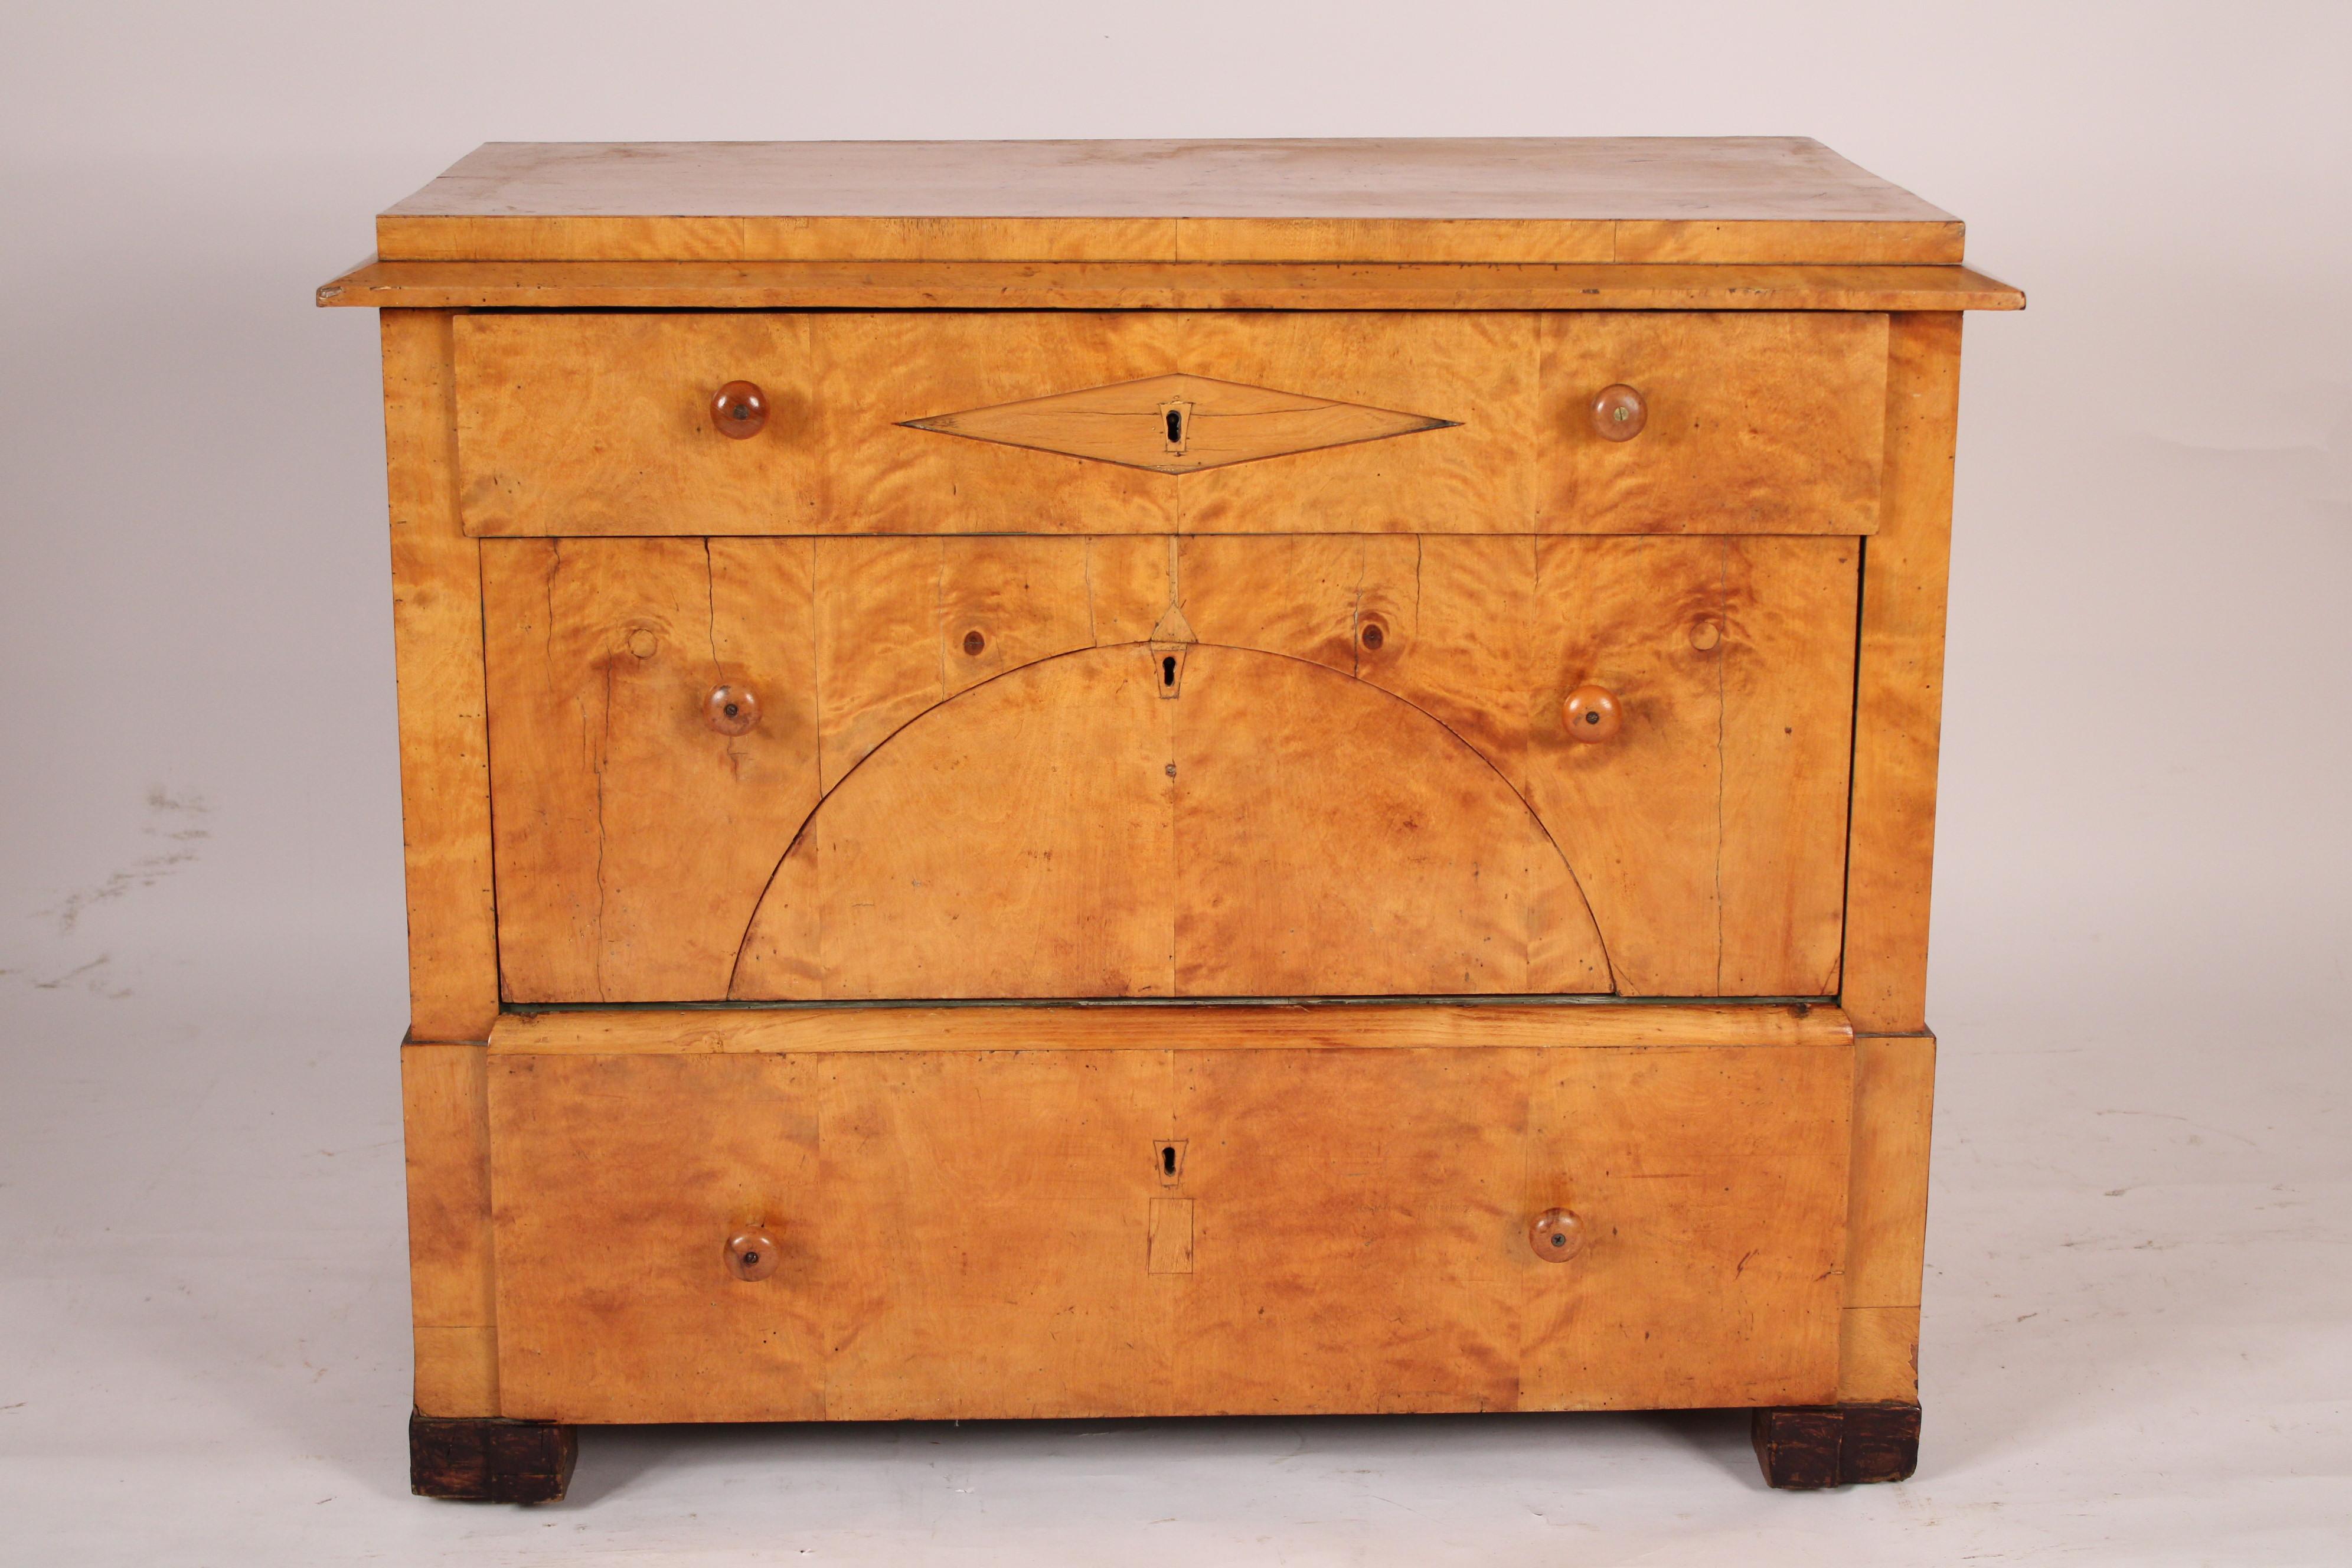 Biedermeier birch 3 drawer chest of drawers, 19th century. With a rectangular top a top drawer with central diamond shape inlay, middle drawer with a semi circular arch and a bottom drawer. Resting on later black ebonized feet.